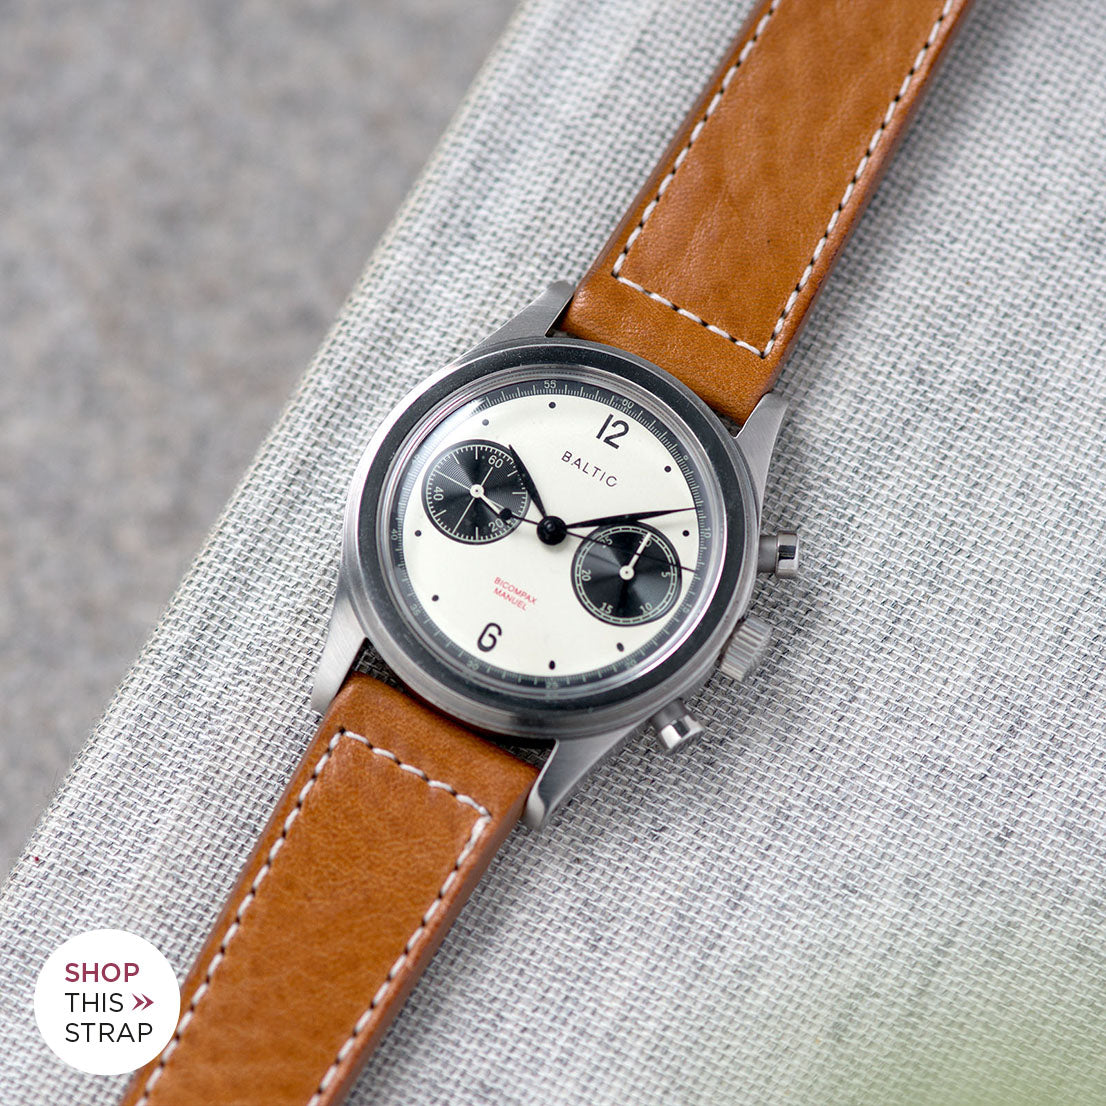 Bulang and Sons_Strap Guide_The Baltic-Chronograph-Panda-Limited-Edition_Gilt Brown Leather Watch Strap